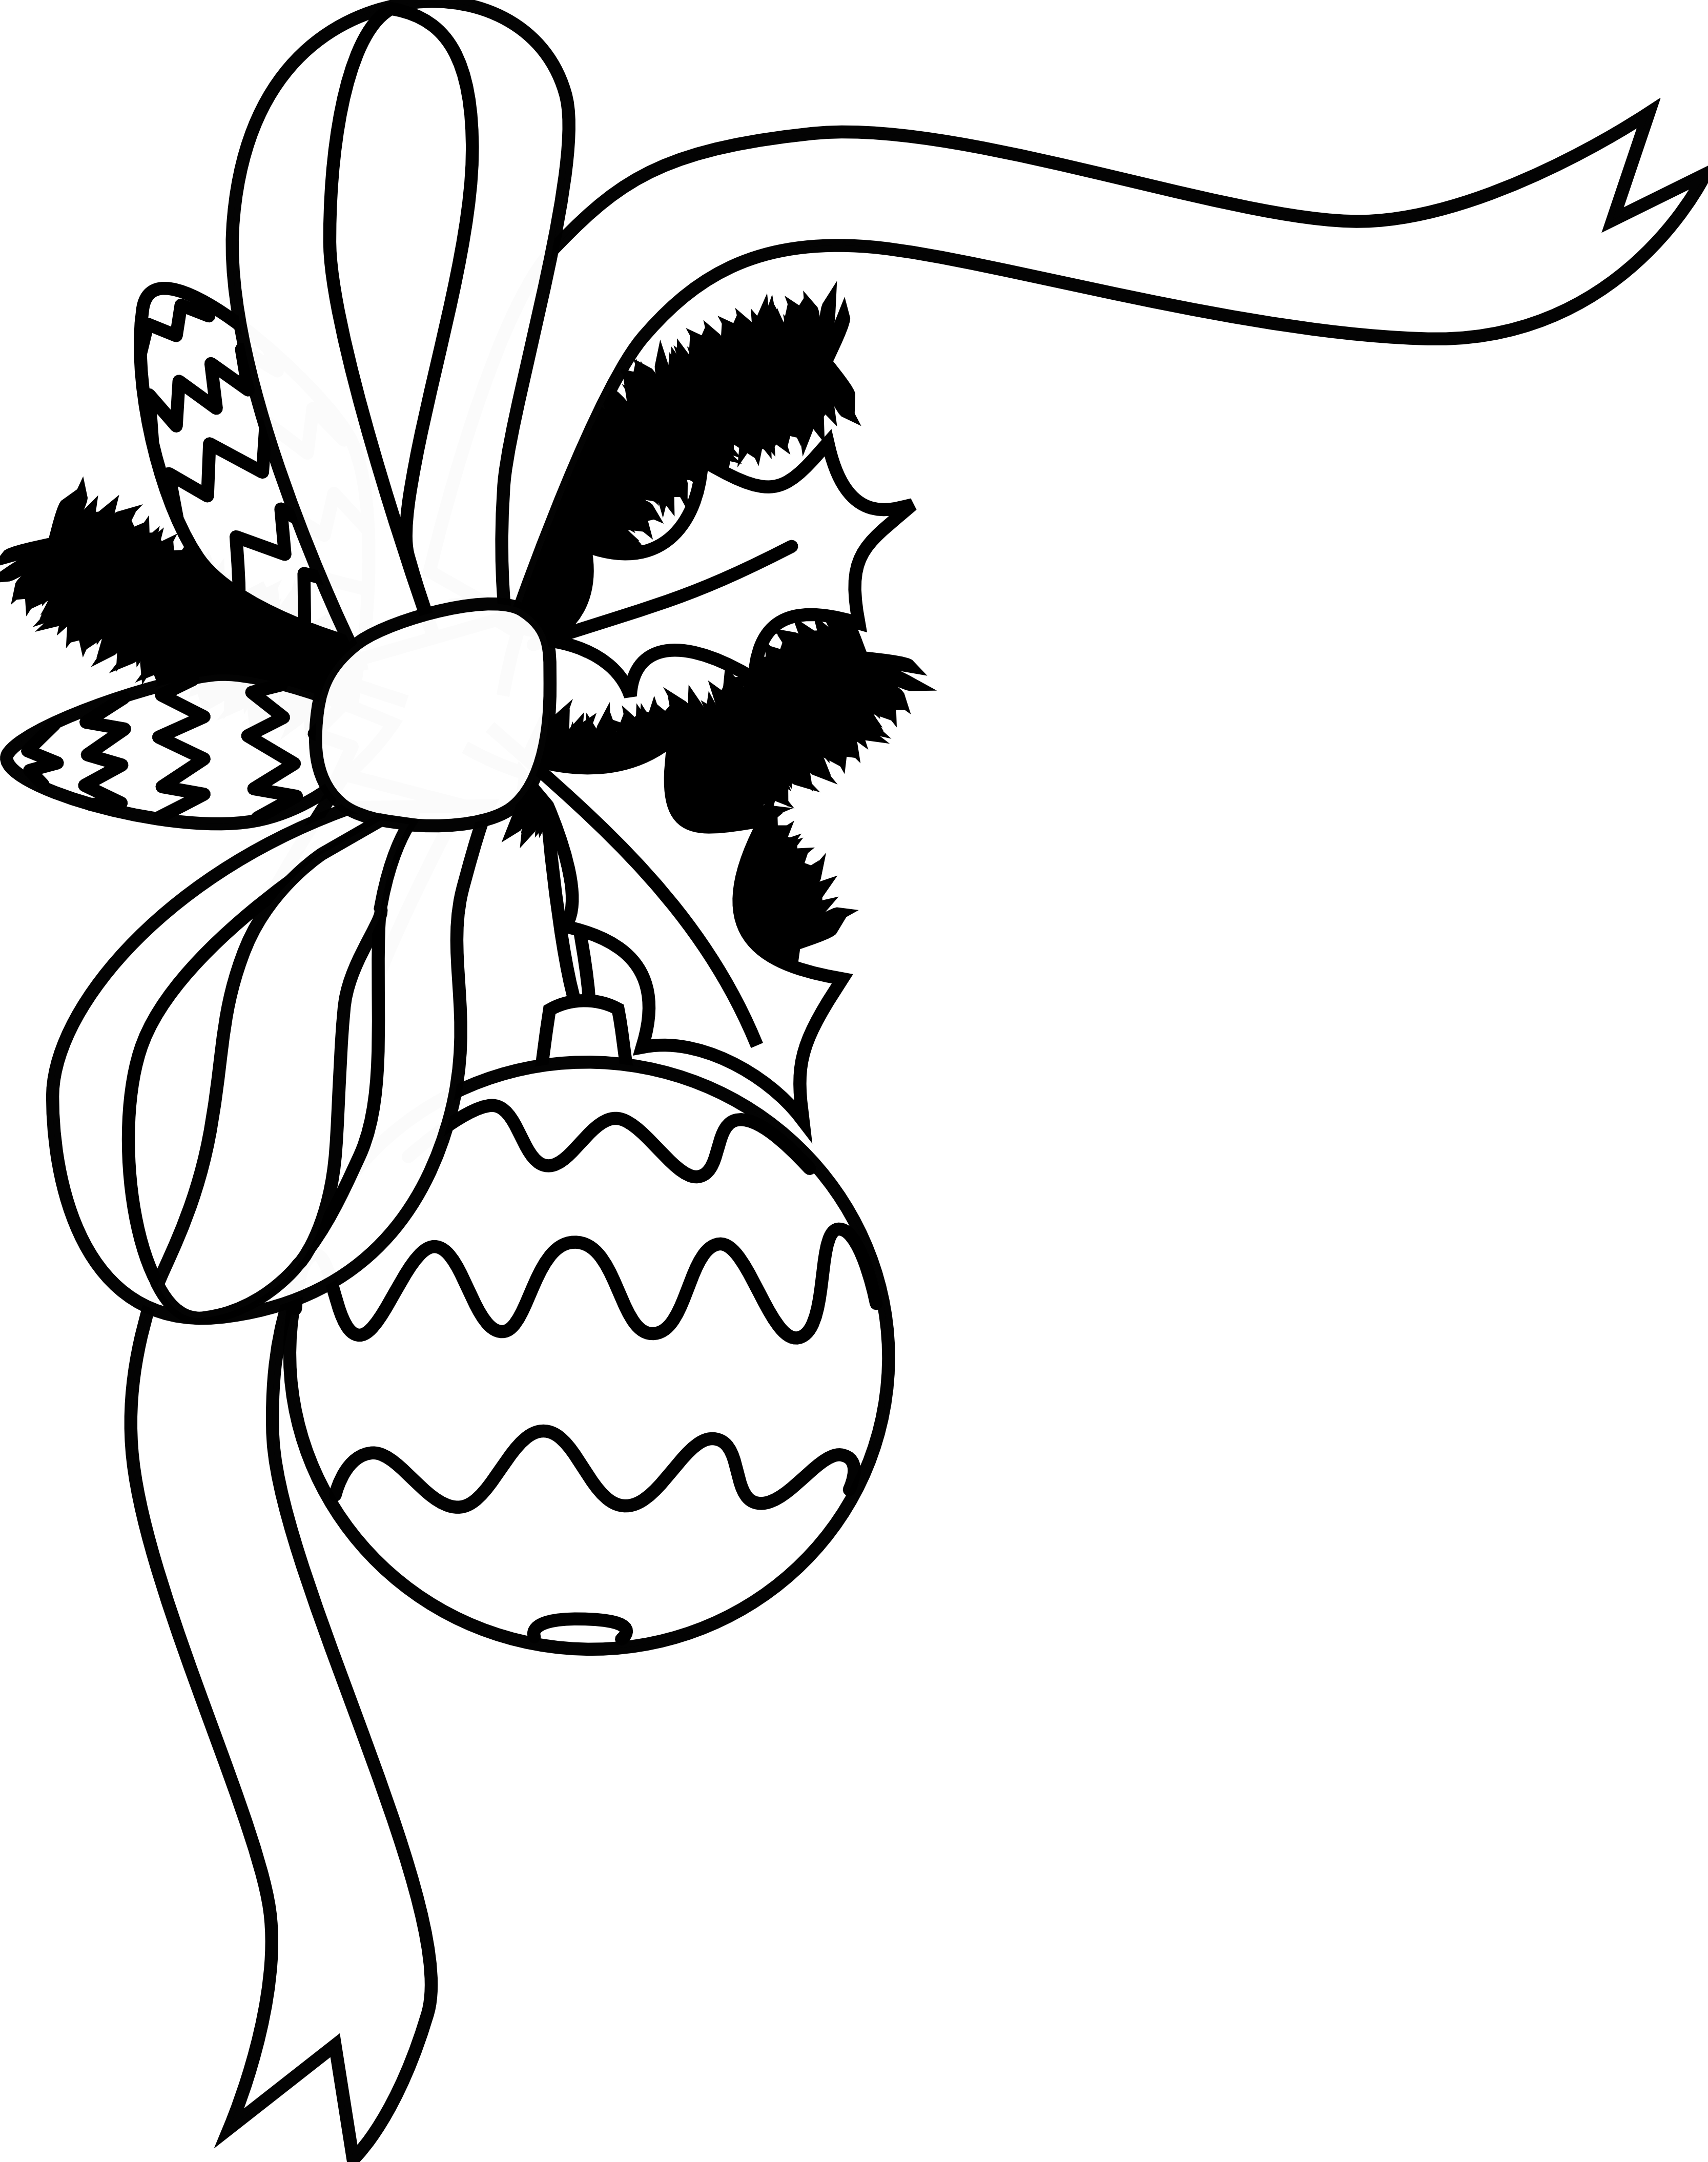 Free christmas images download. Heat clipart black and white